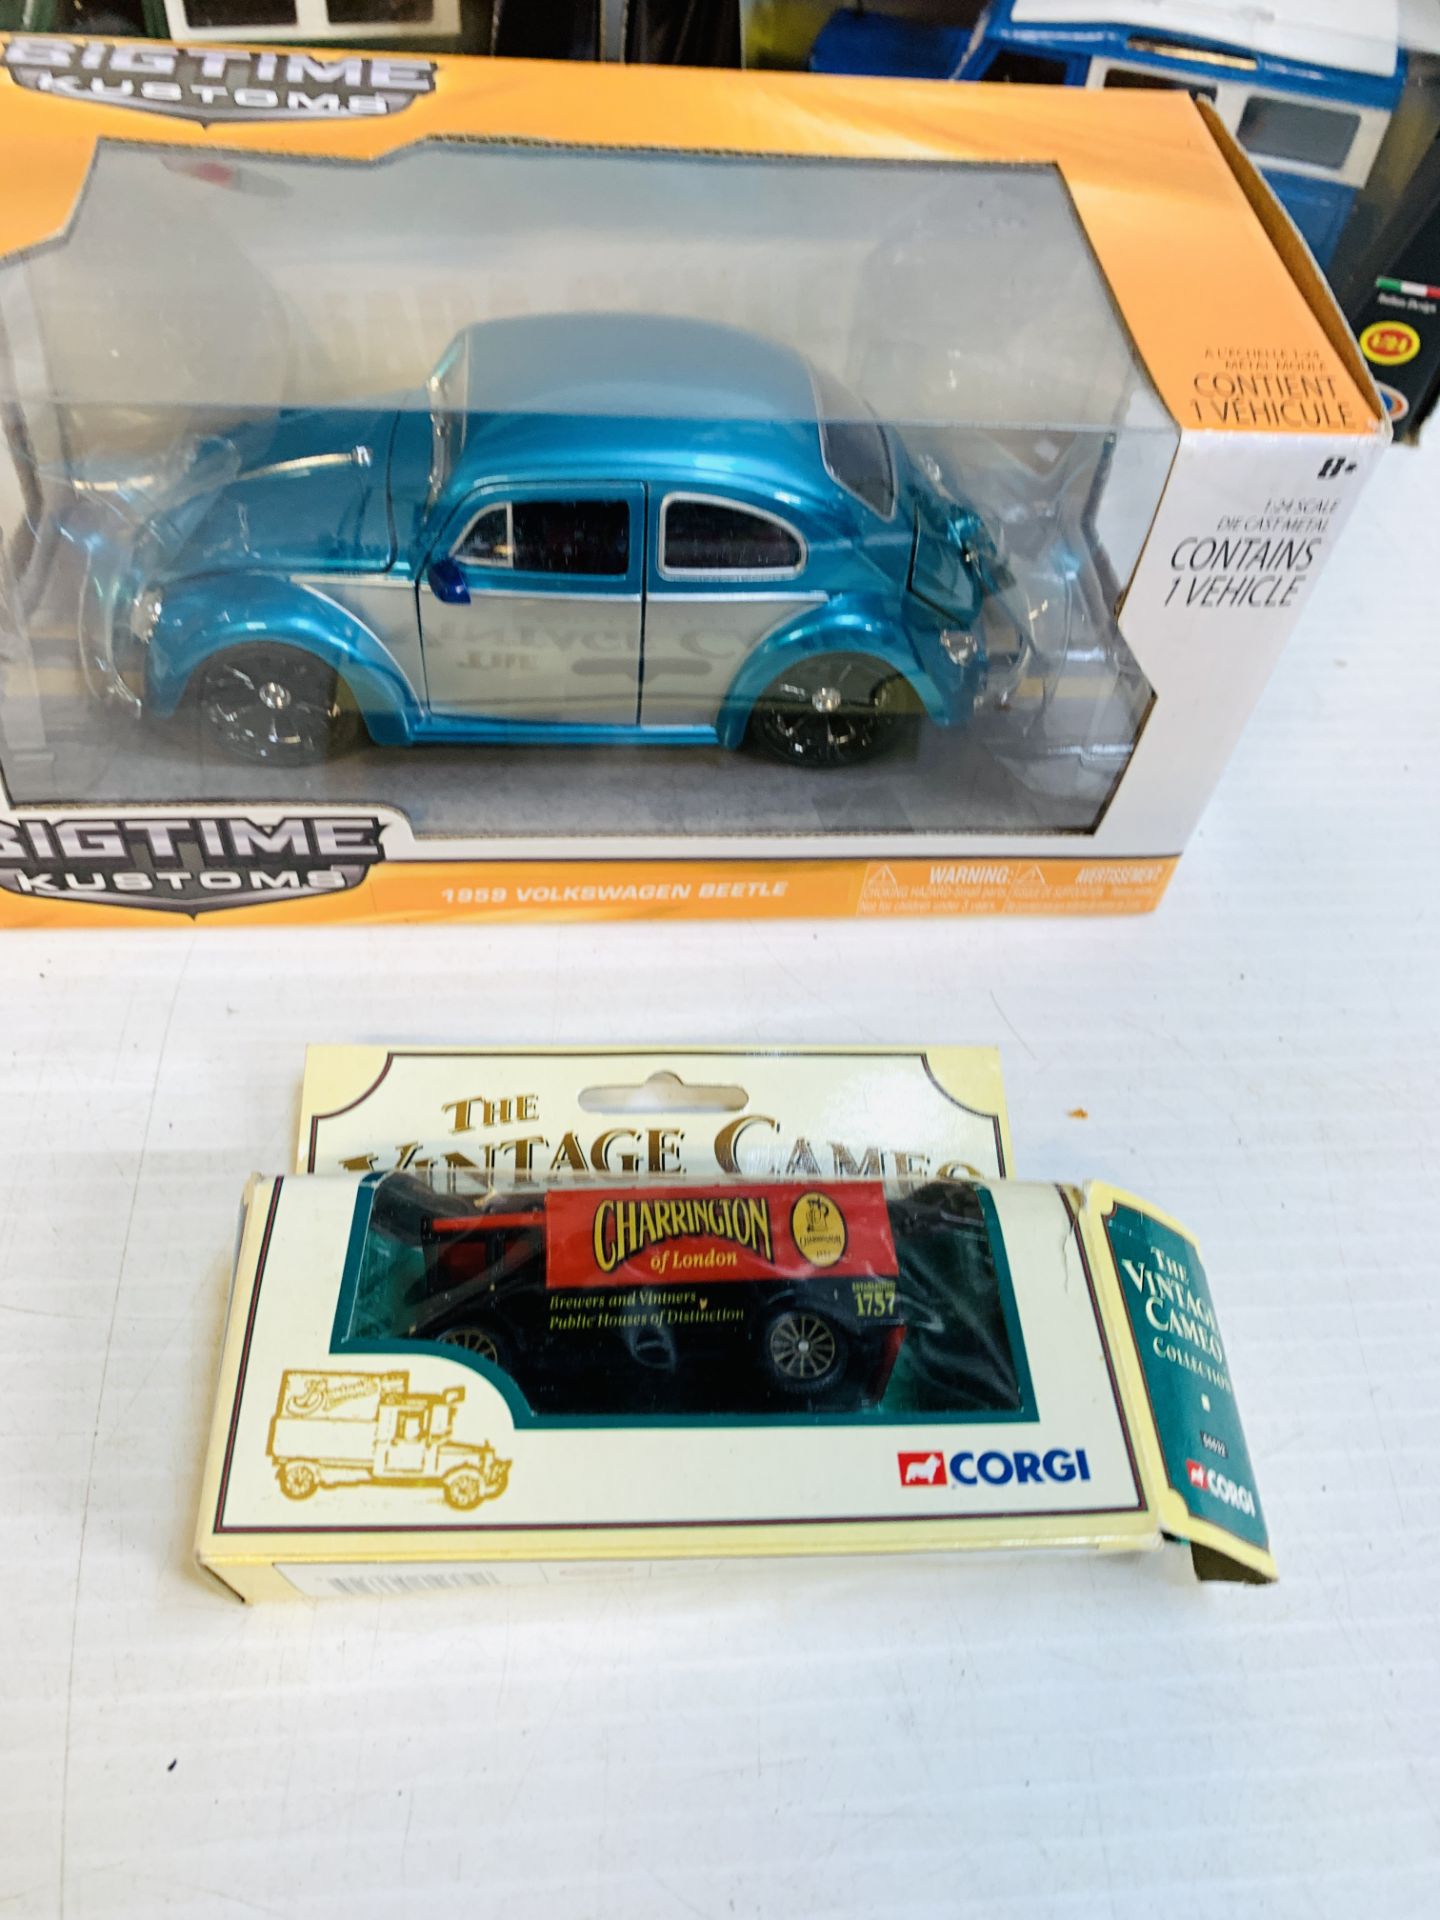 Two Burago diecast Land Rovers; a Big Time Kustoms diecast Volkswagen Beetle and others - Image 5 of 5